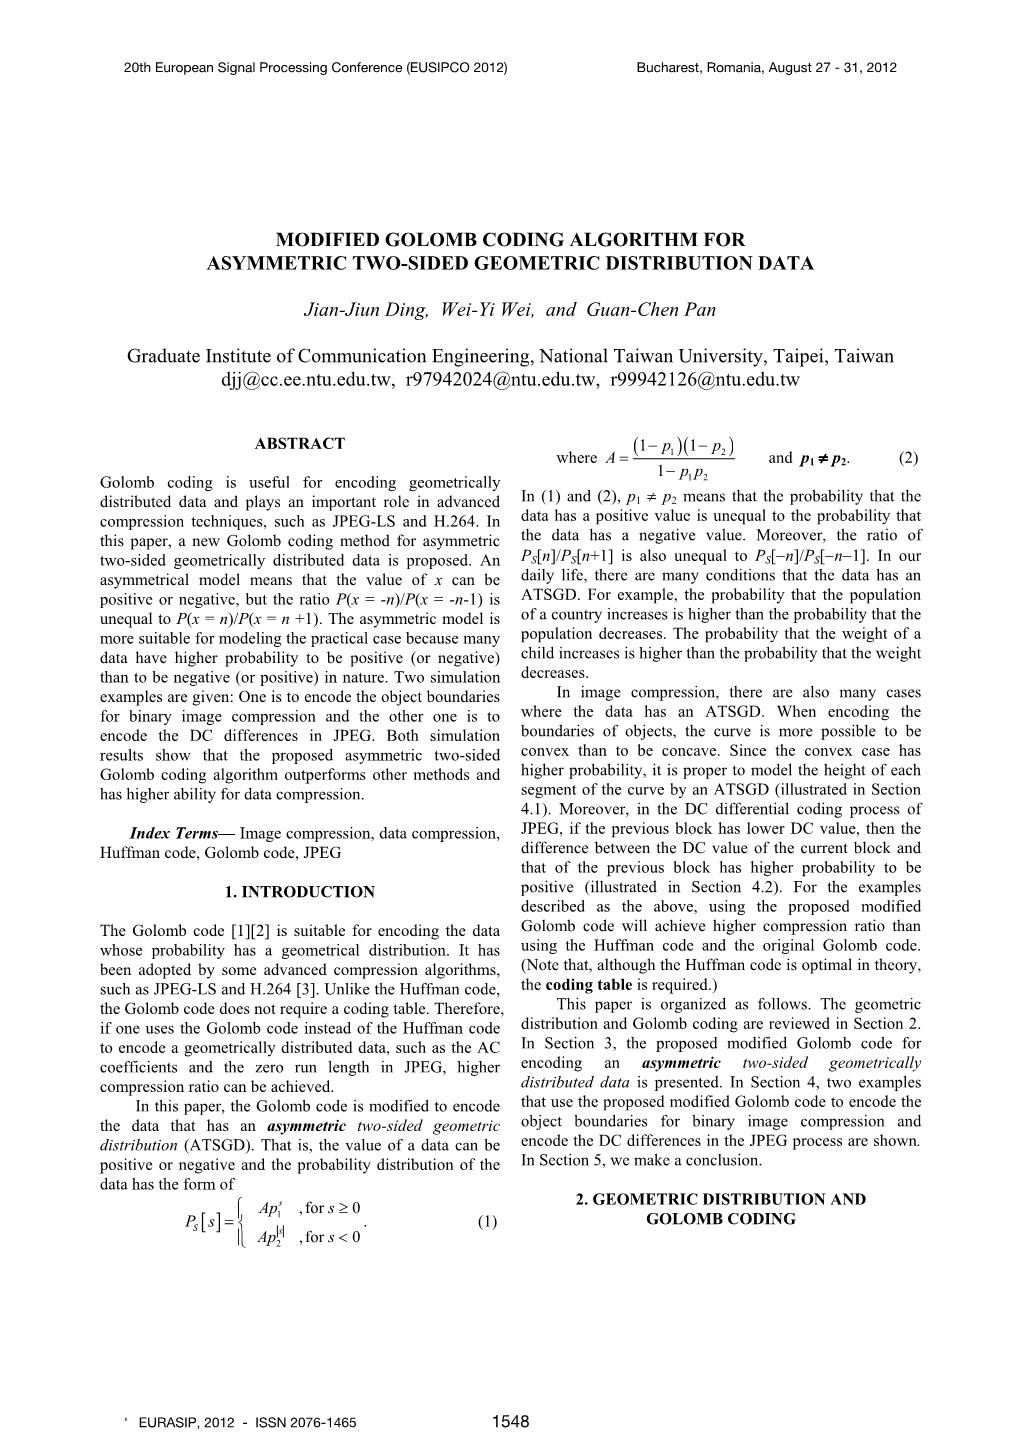 Modified Golomb Coding Algorithm for Asymmetric Two-Sided Geometric Distribution Data